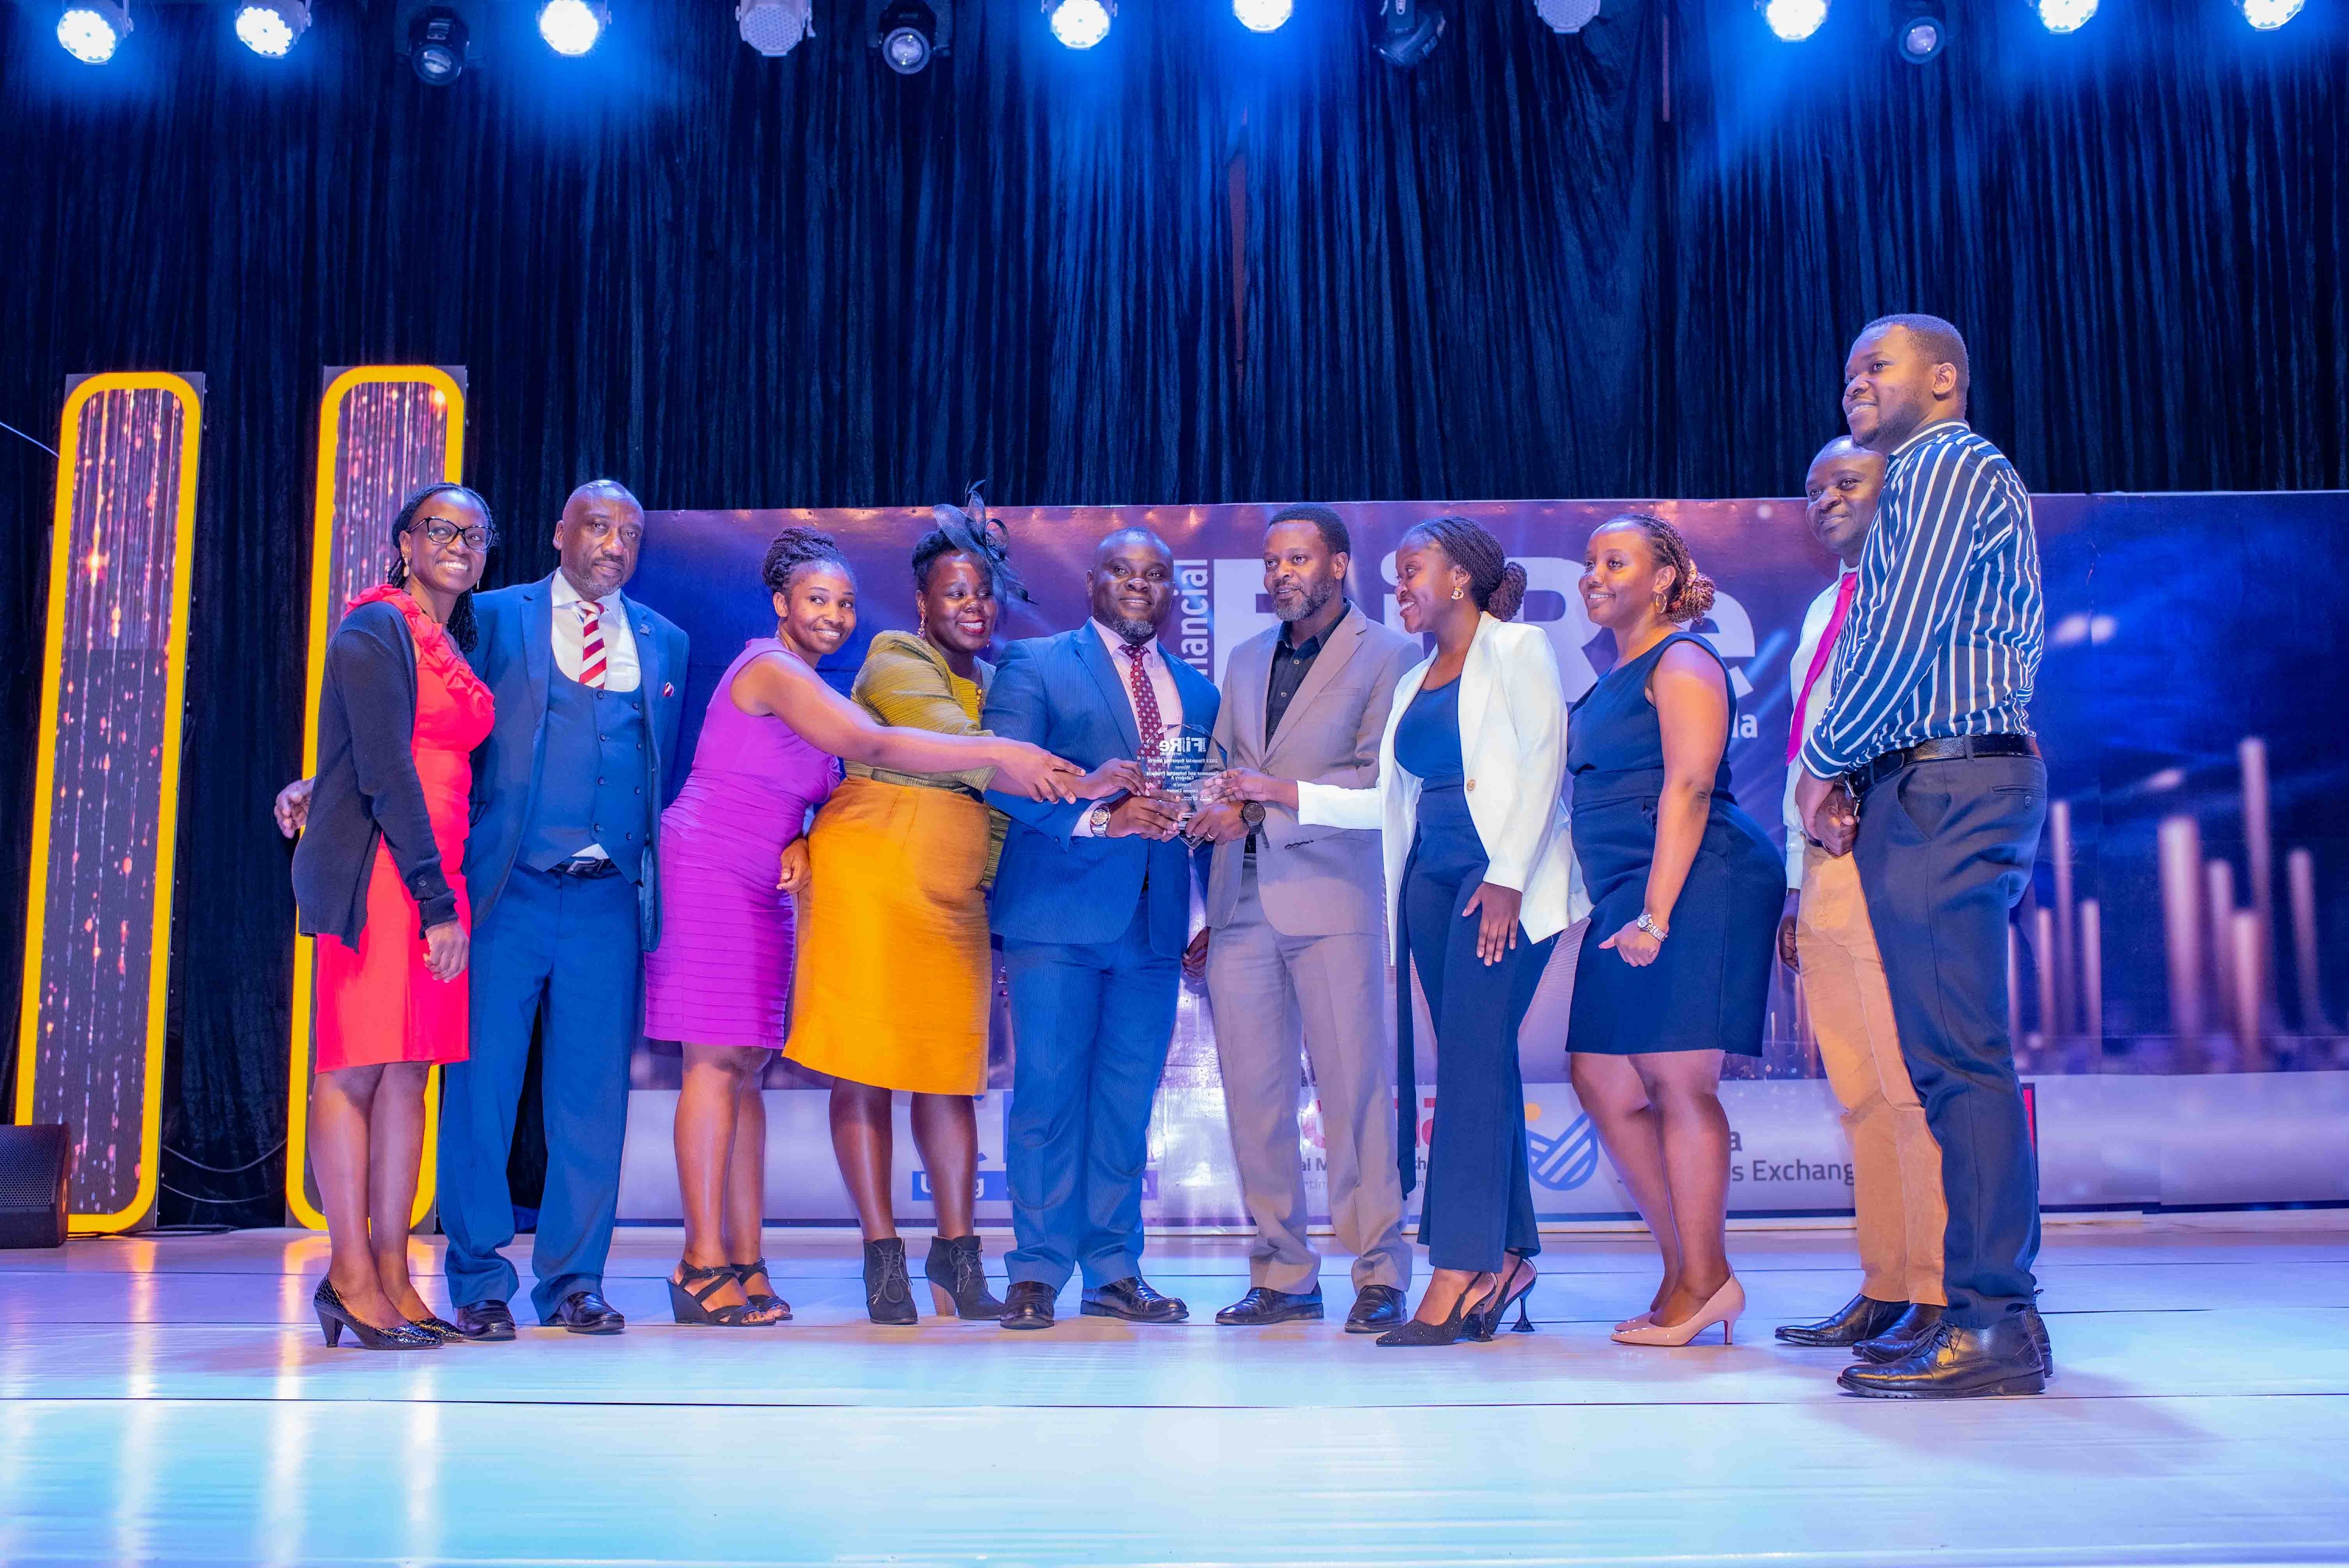 Umeme Limited Team clinches the prestigious 2023 Best Listed Entity Award. UMEME Limited also won the Consumer and Industrial Products Award Category.